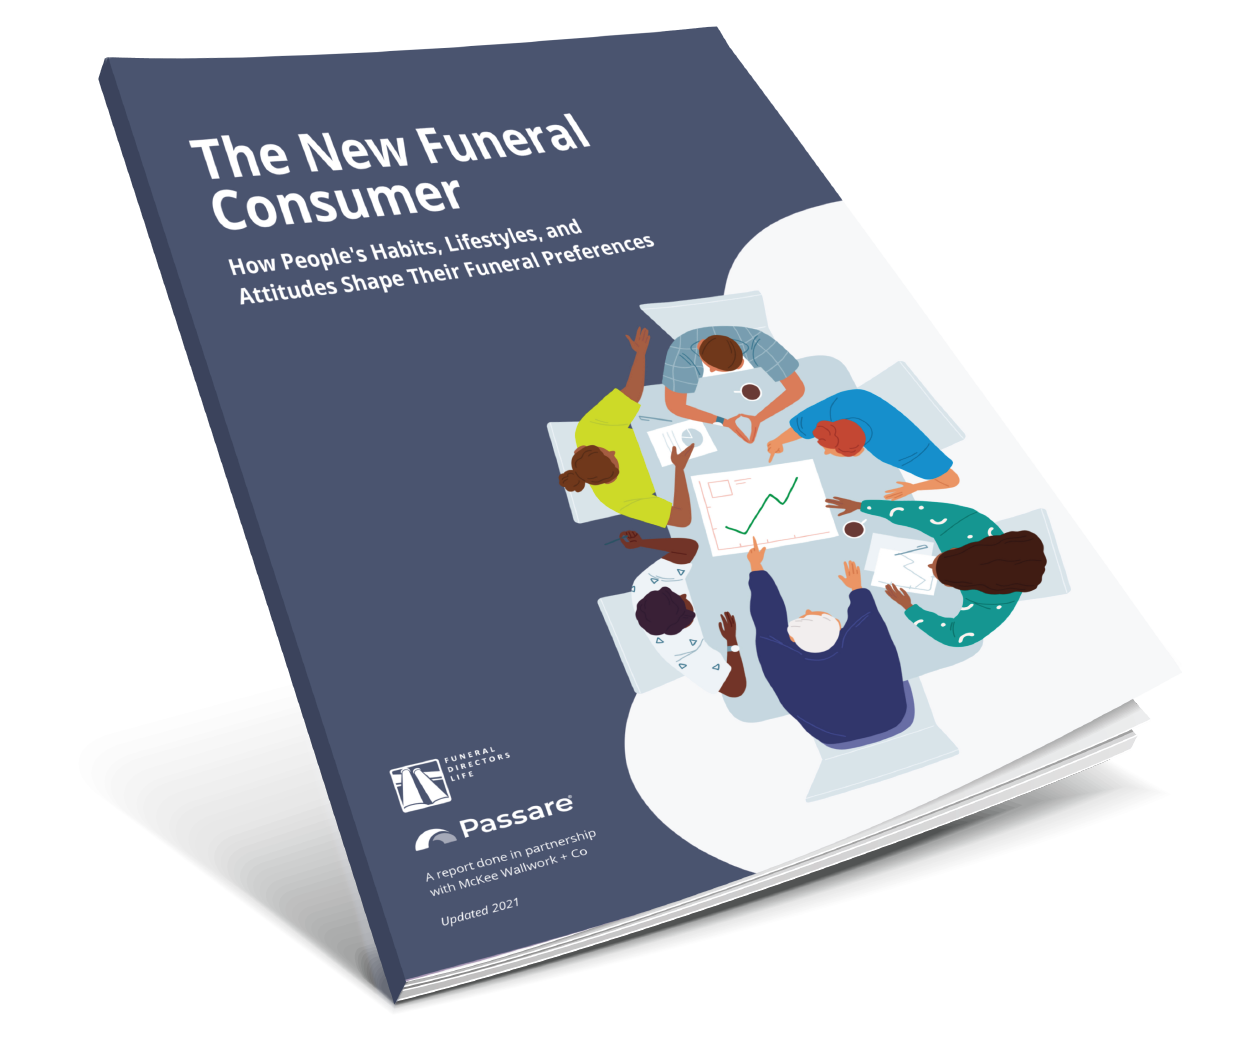 The New Funeral Consumer ebook